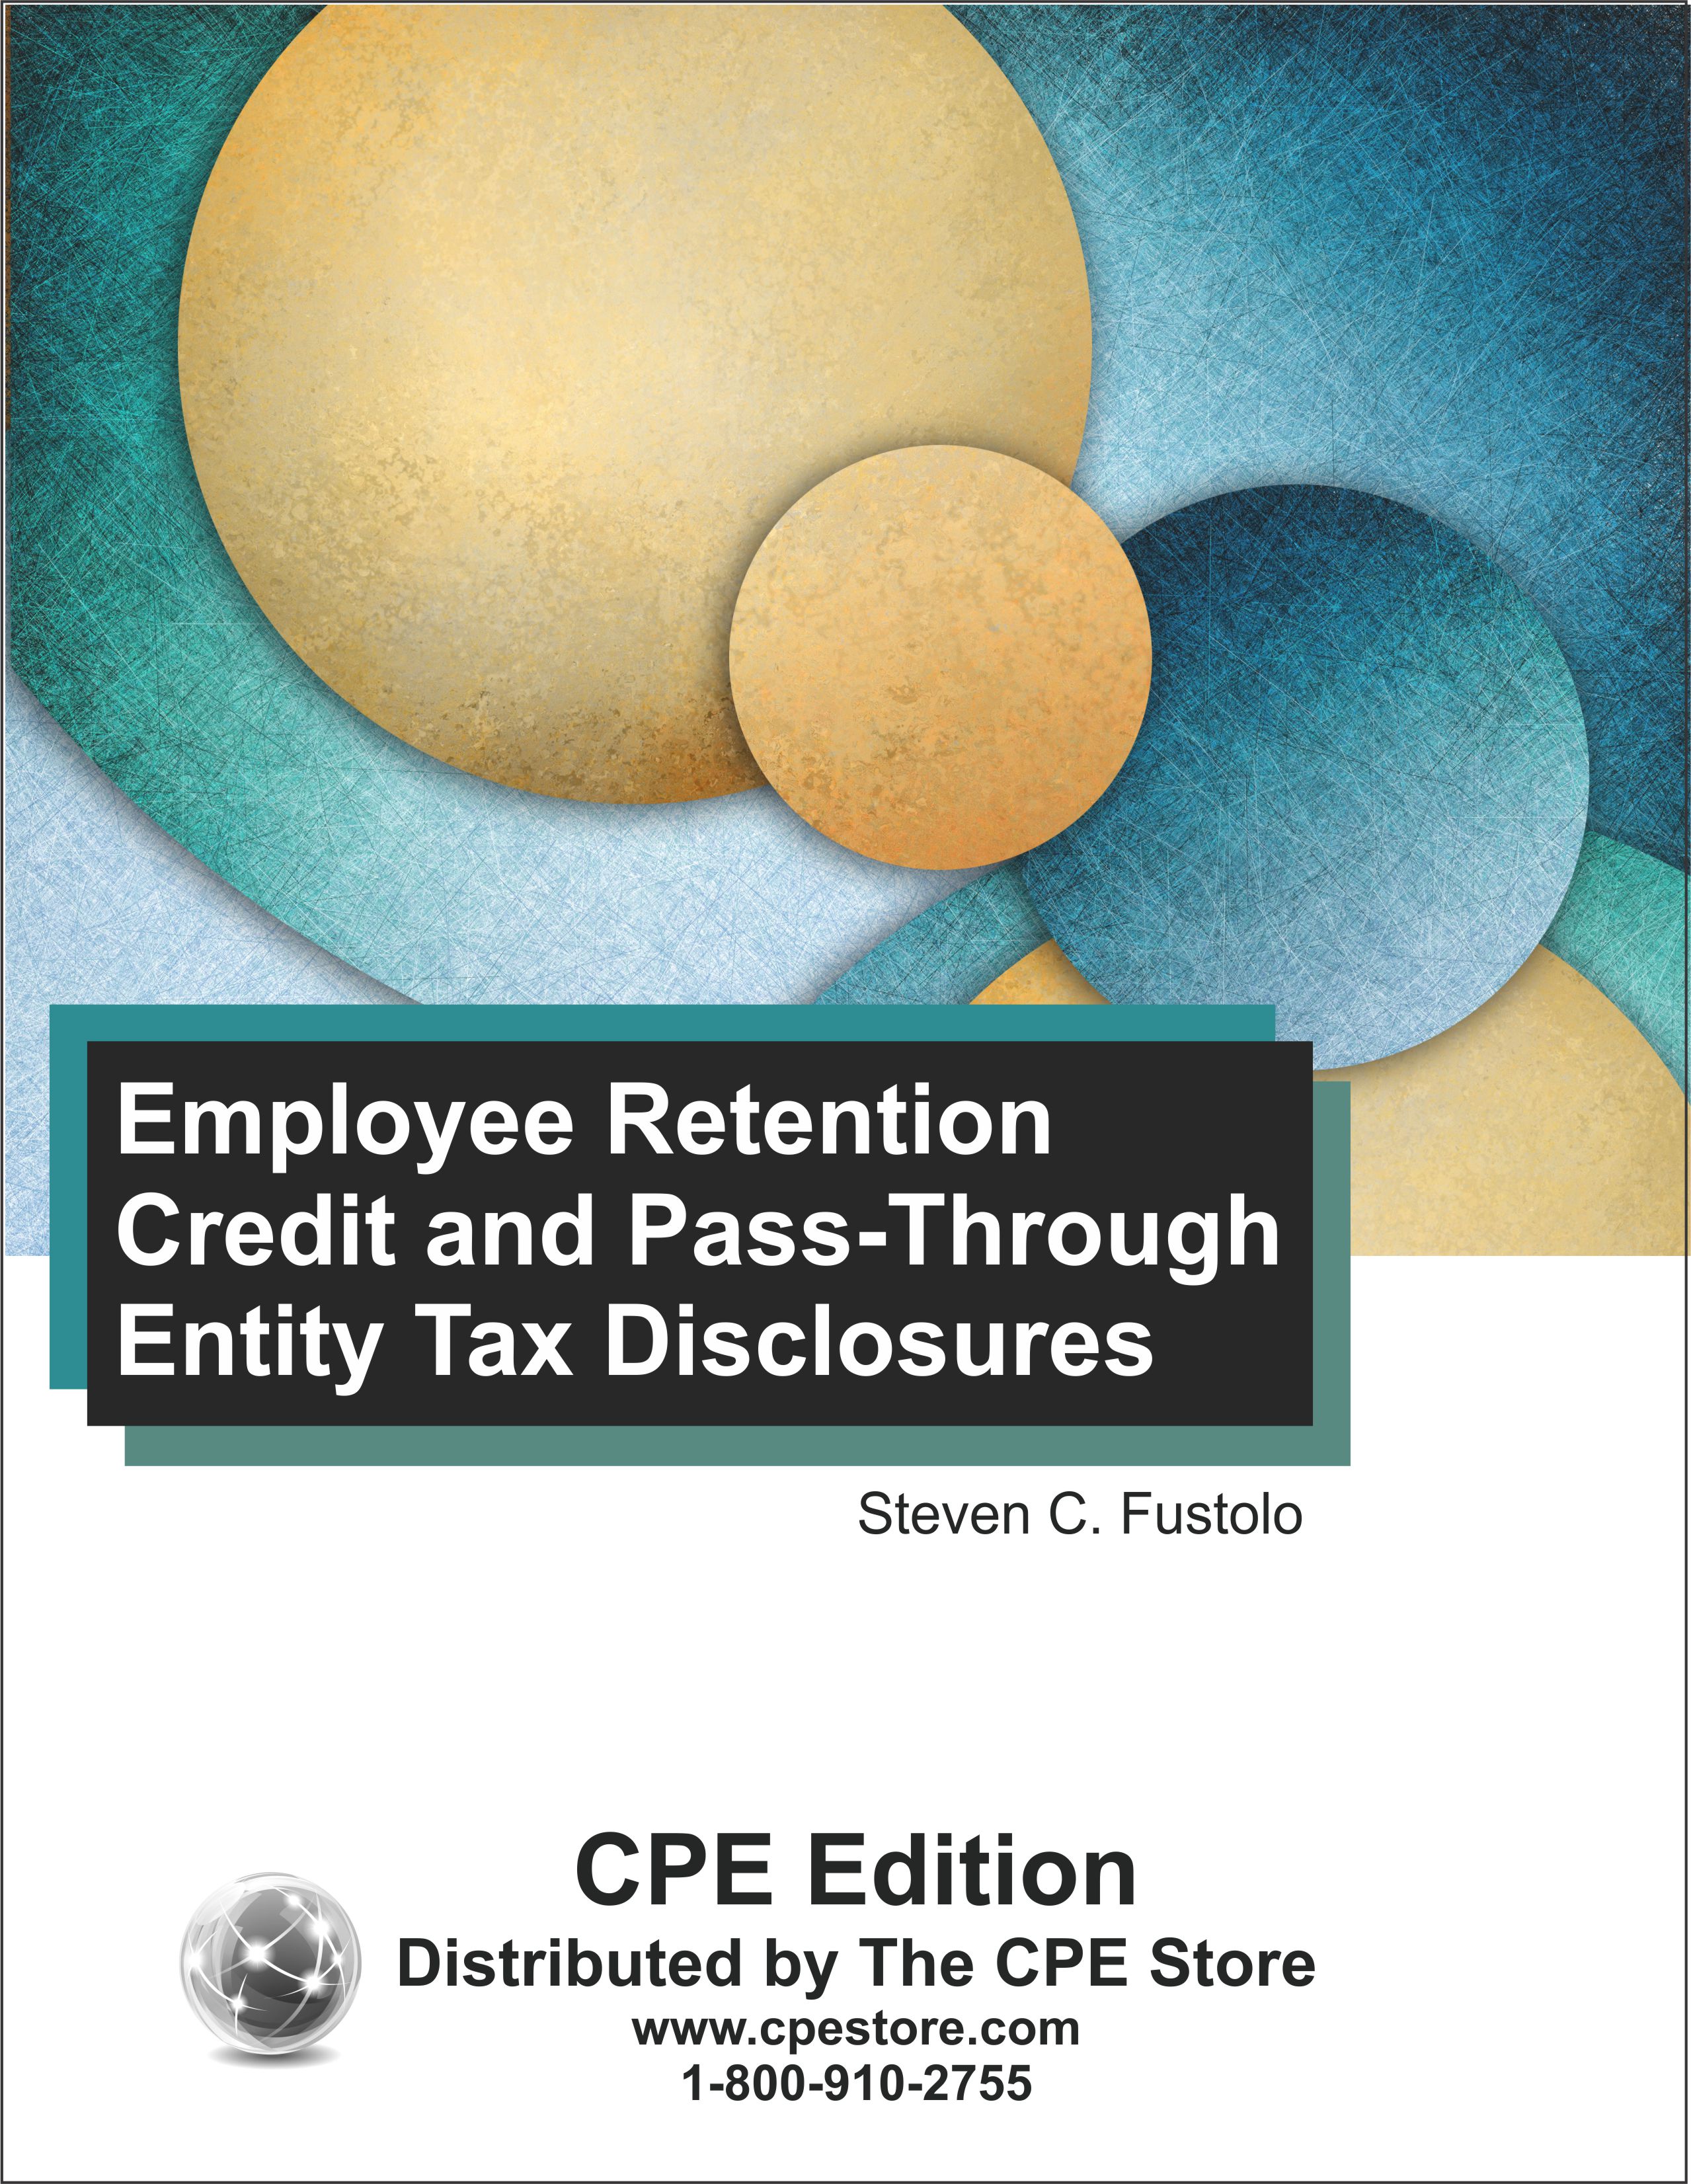 Employee Retention Credit & Pass-Through Entity Tax Disclosures